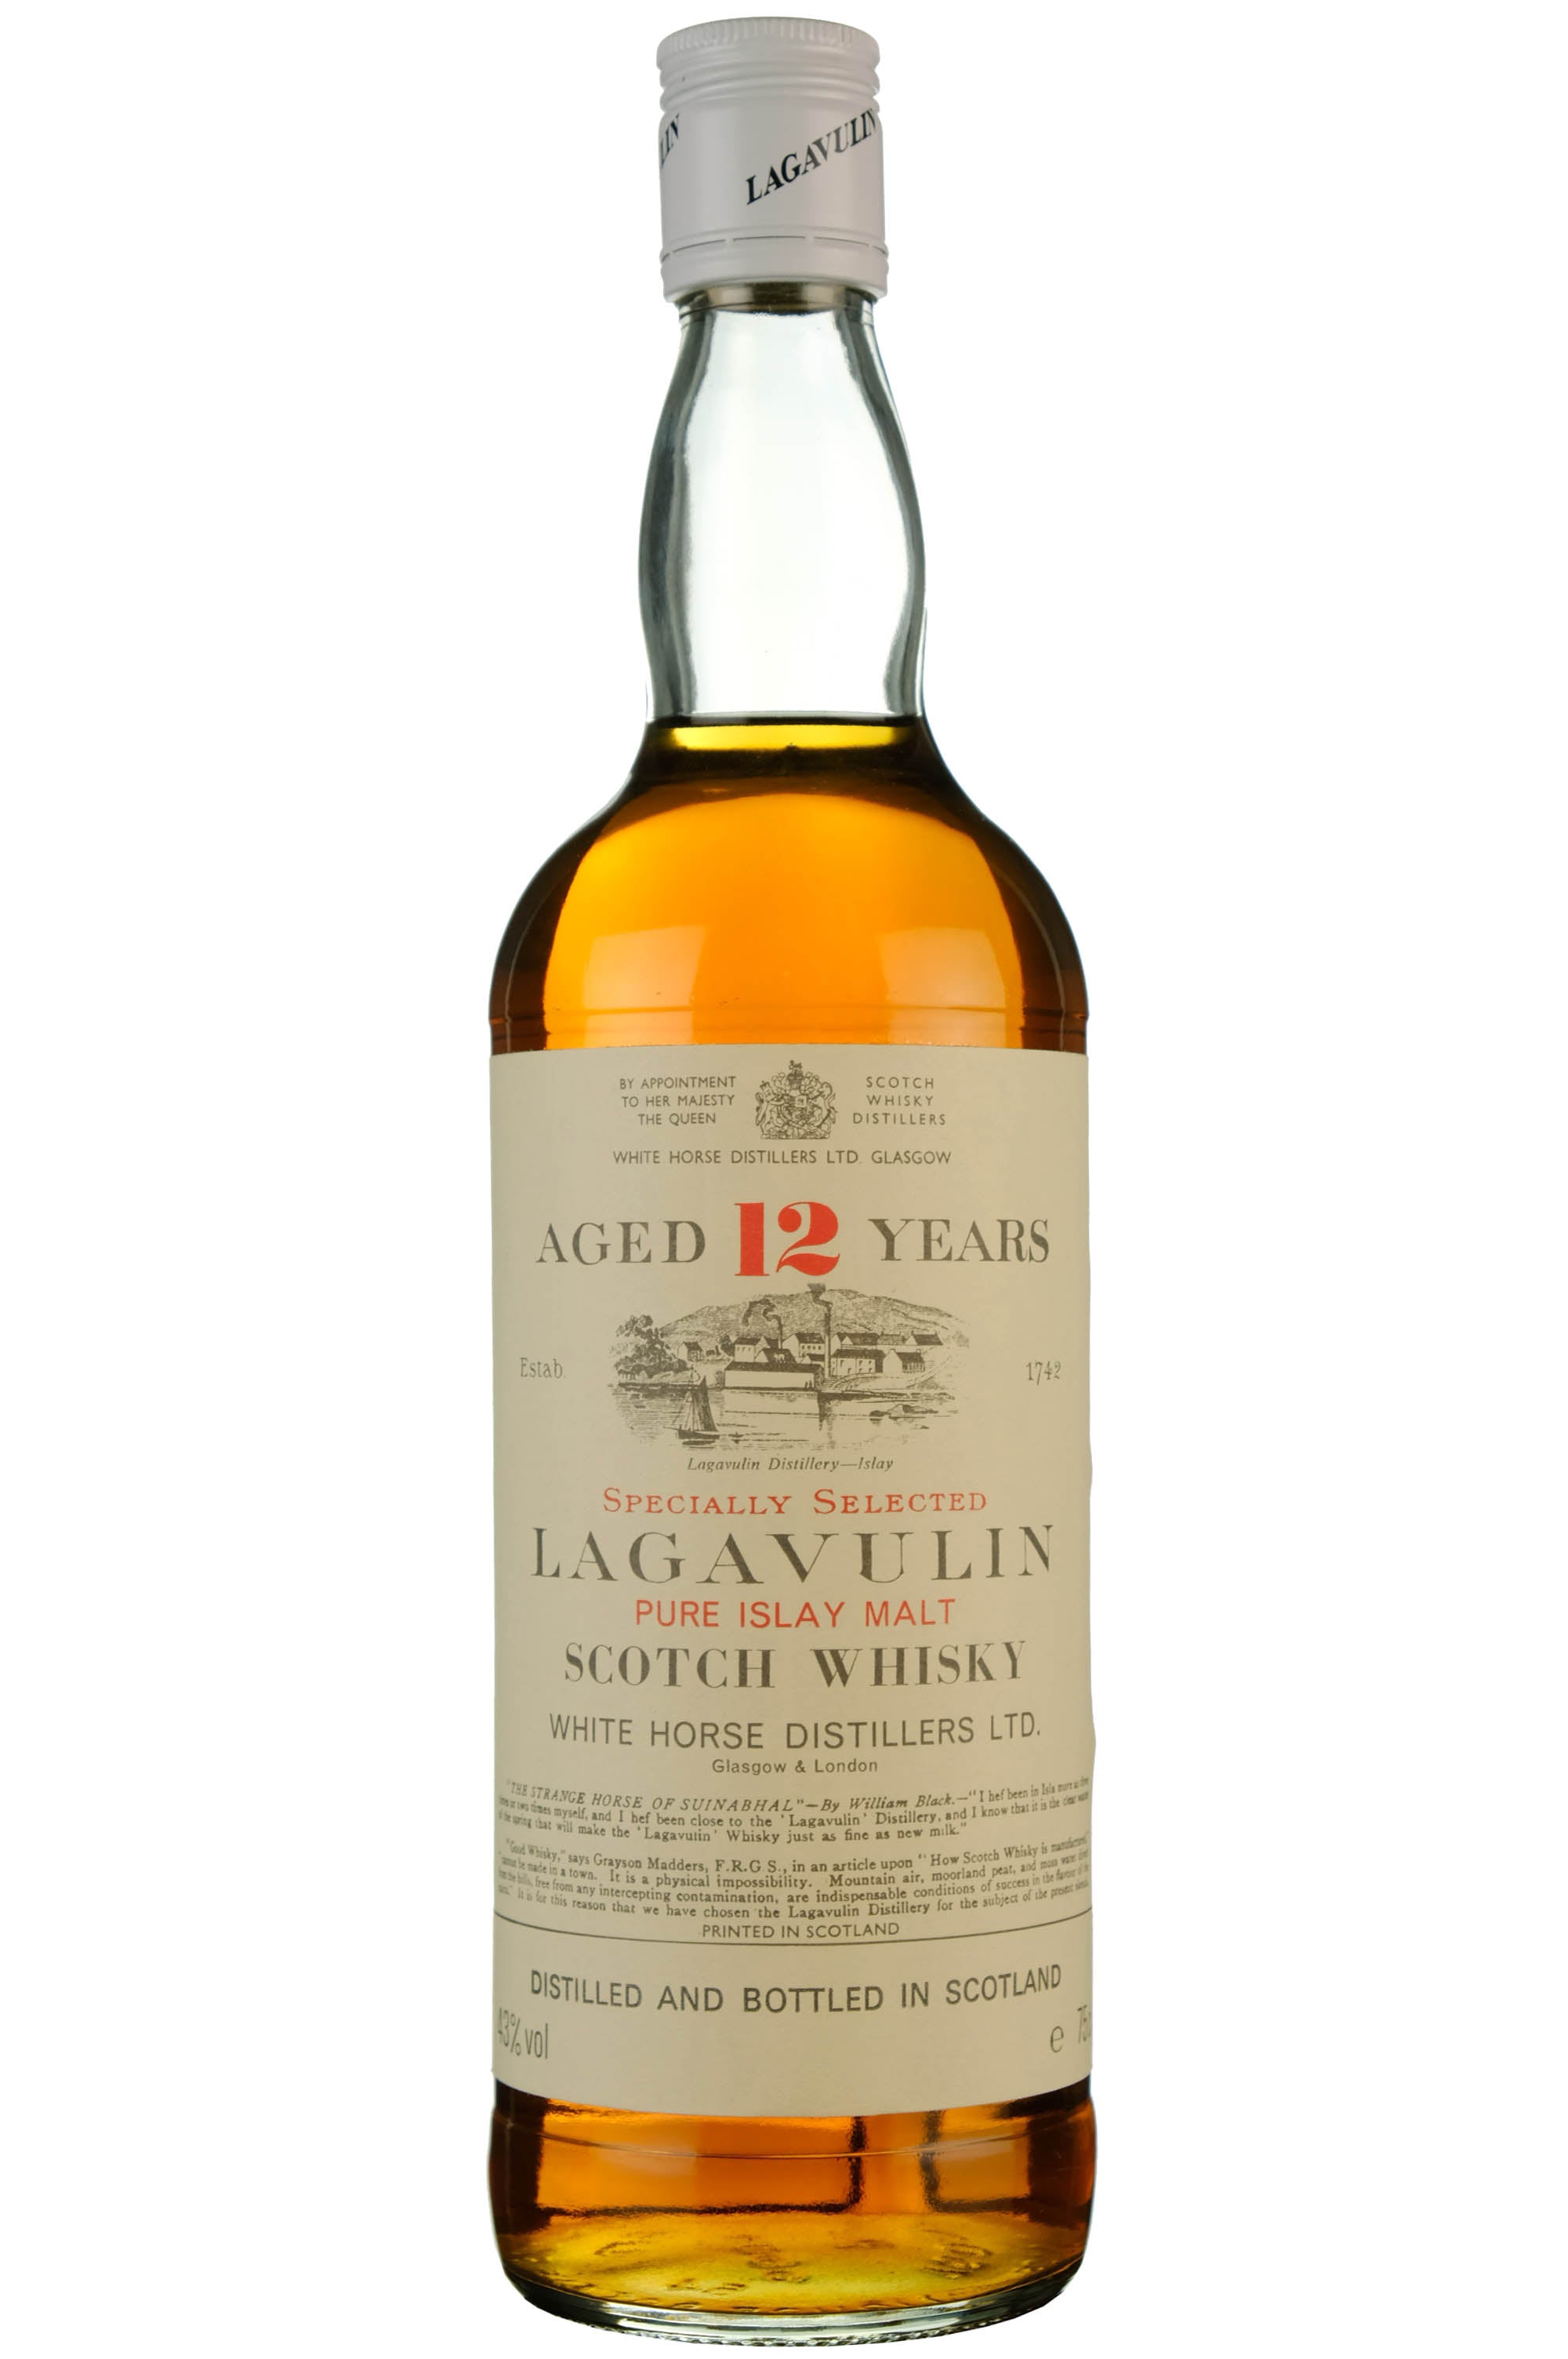 Lagavulin 12 Year Old White Horse Distillers Early 1980s